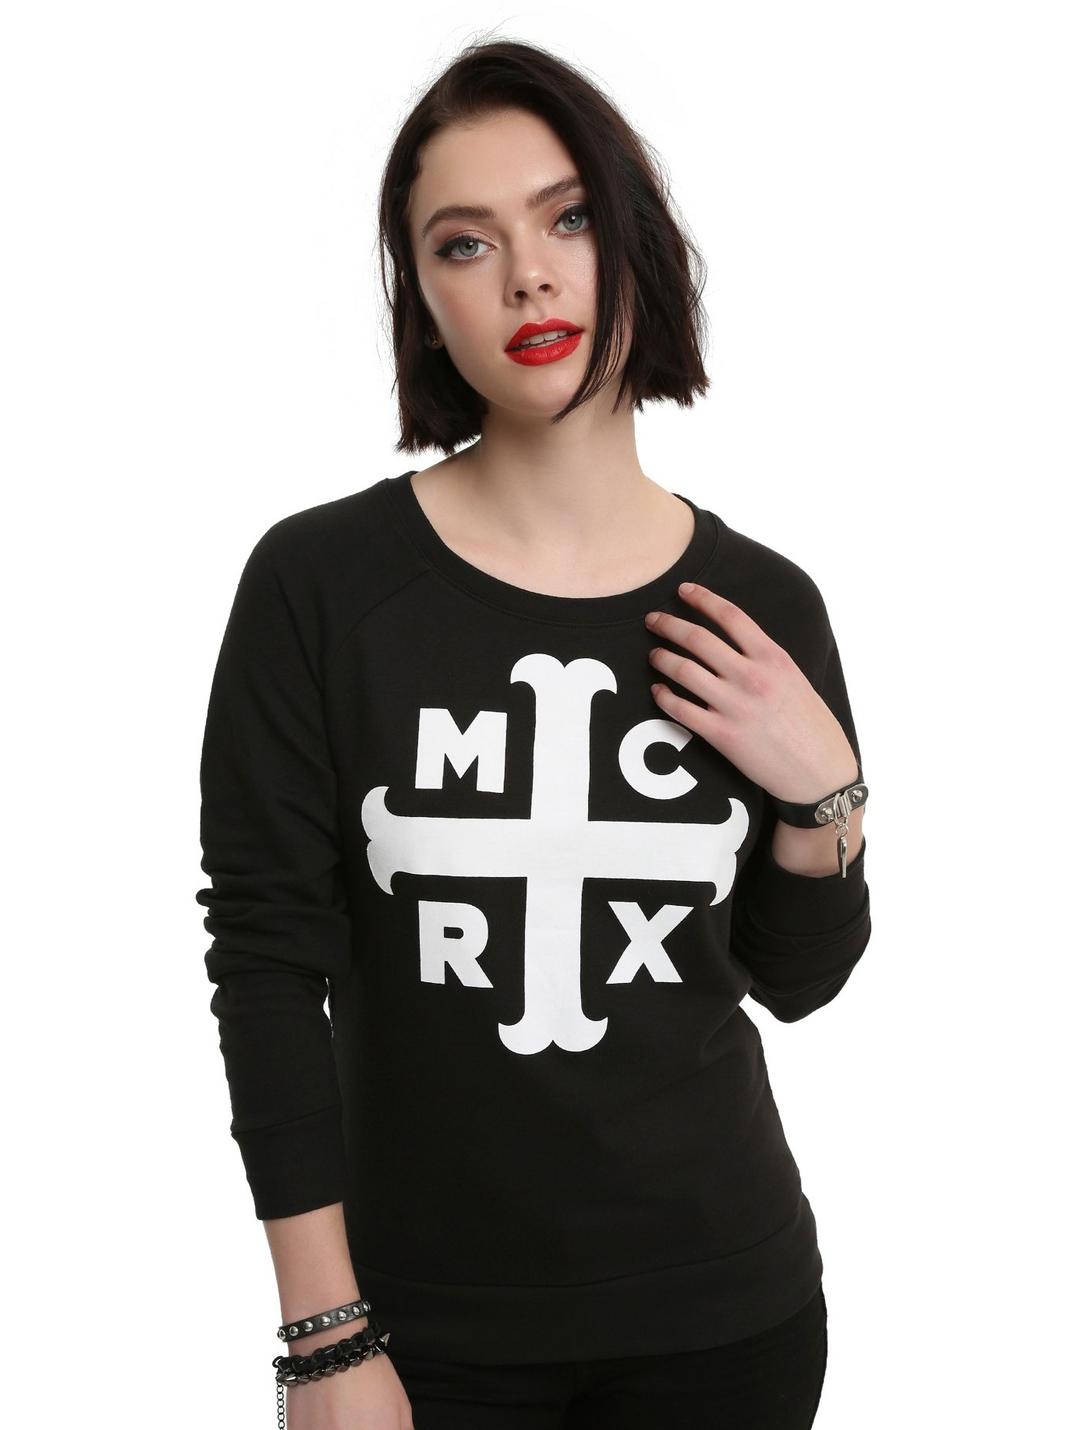 My Chemical Romance Cross Lace Back Girls Sweater, BLACK, hi-res